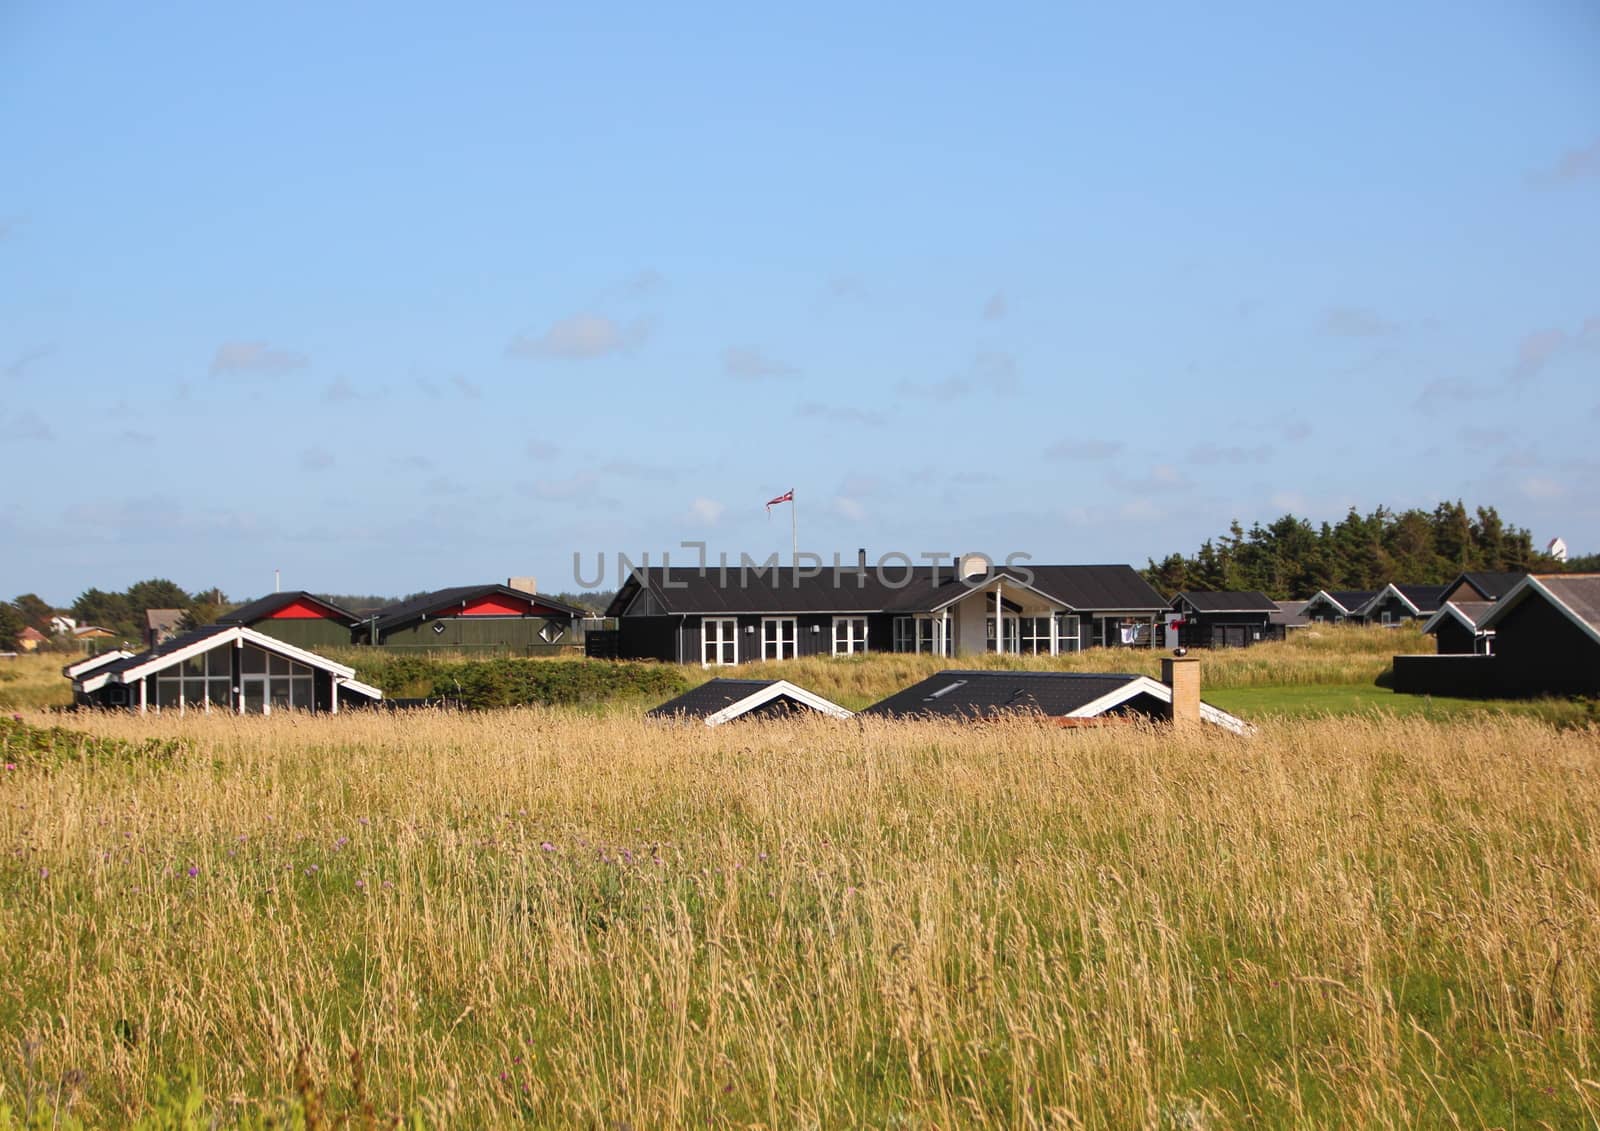 Danish Summer Houses in Green Hills with Blue Sky